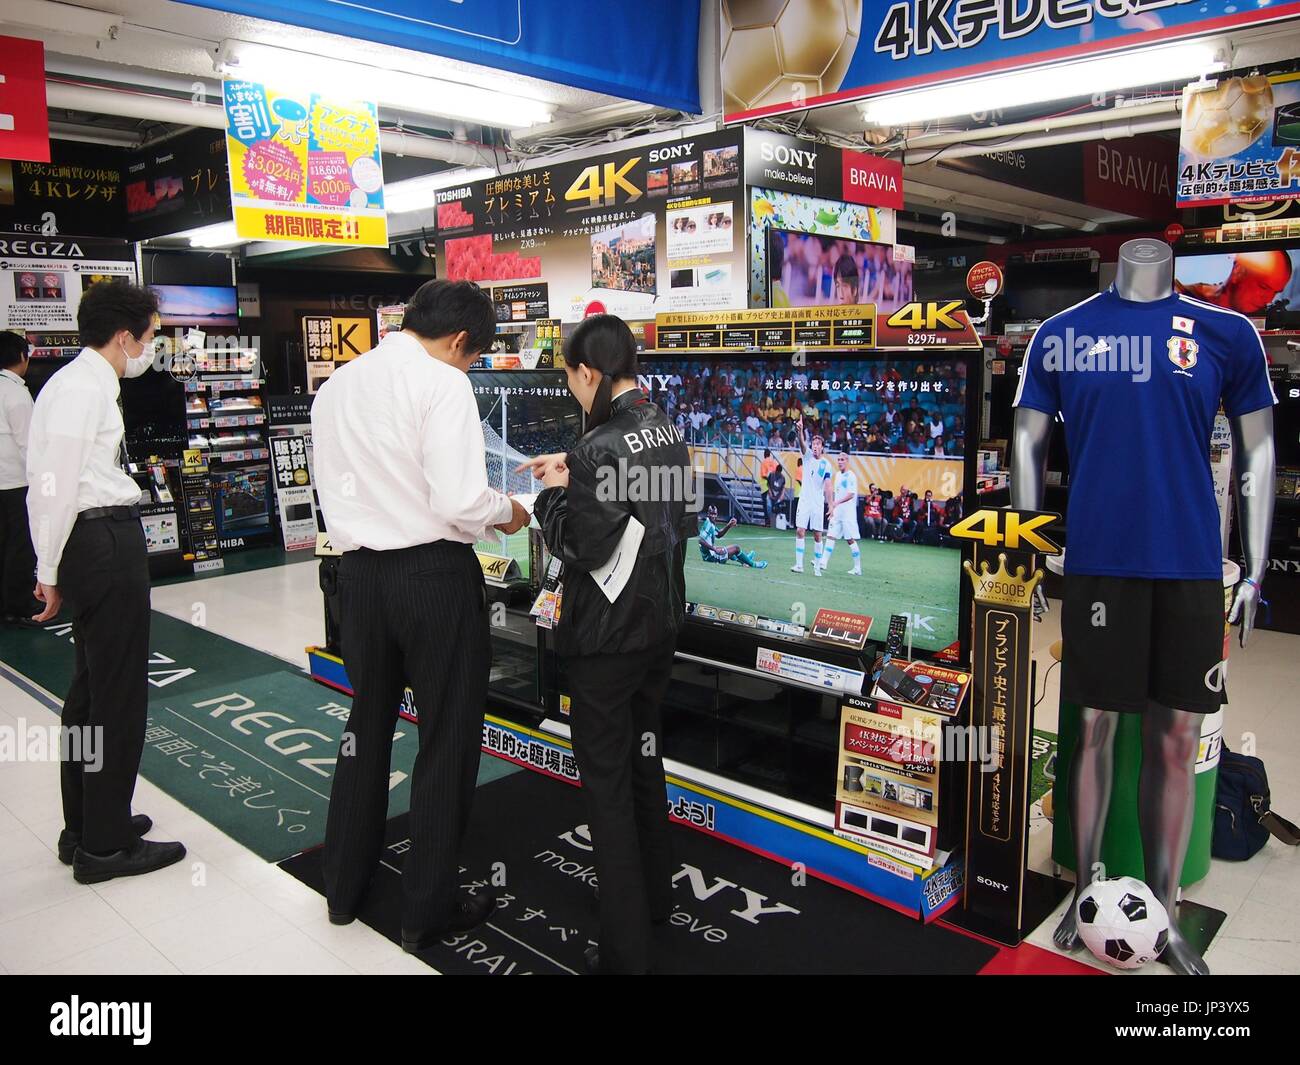 TOKYO, Japan - The sales floor for television sets at a large electronics retail store in Tokyo is attracting attention of potential customers on May 16, 2014 for their possessing 4K high-quality images in time for the start of the World Cup finals in Brazil on June 12. (Kyodo) Stock Photo